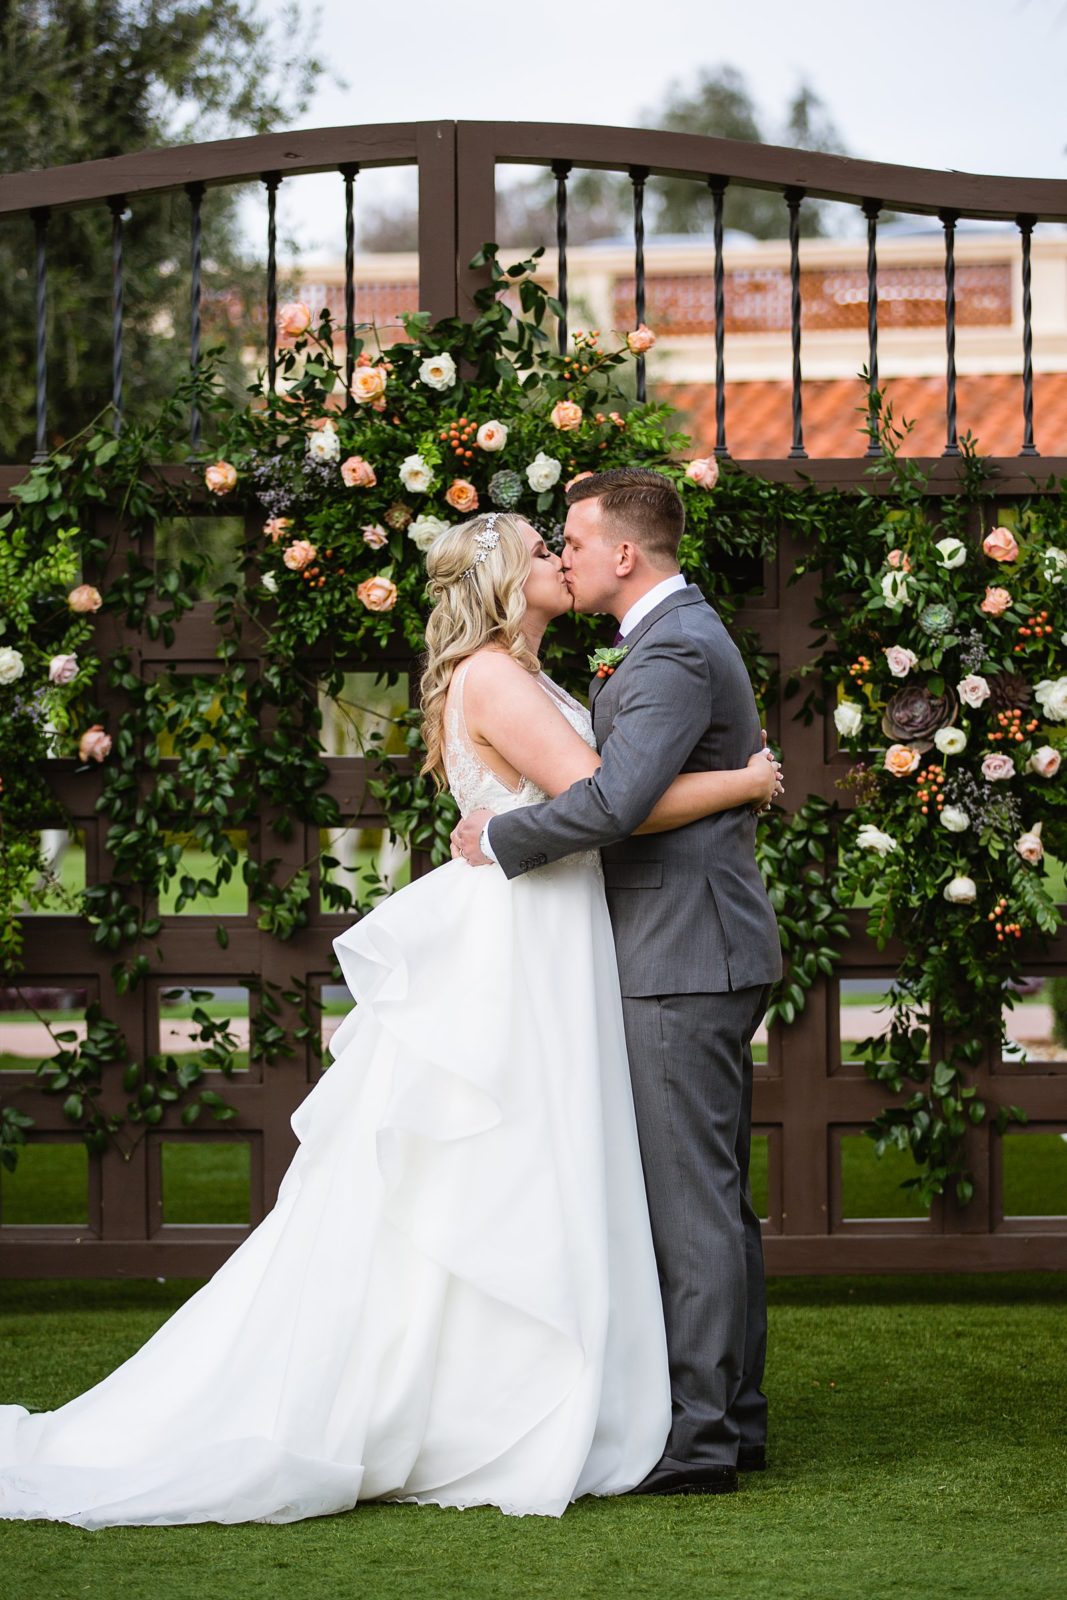 Bride and Groom share their first kiss during their wedding ceremony at The Scottsdale Resort at McCormick Ranch by Arizona wedding photographer PMA Photography.